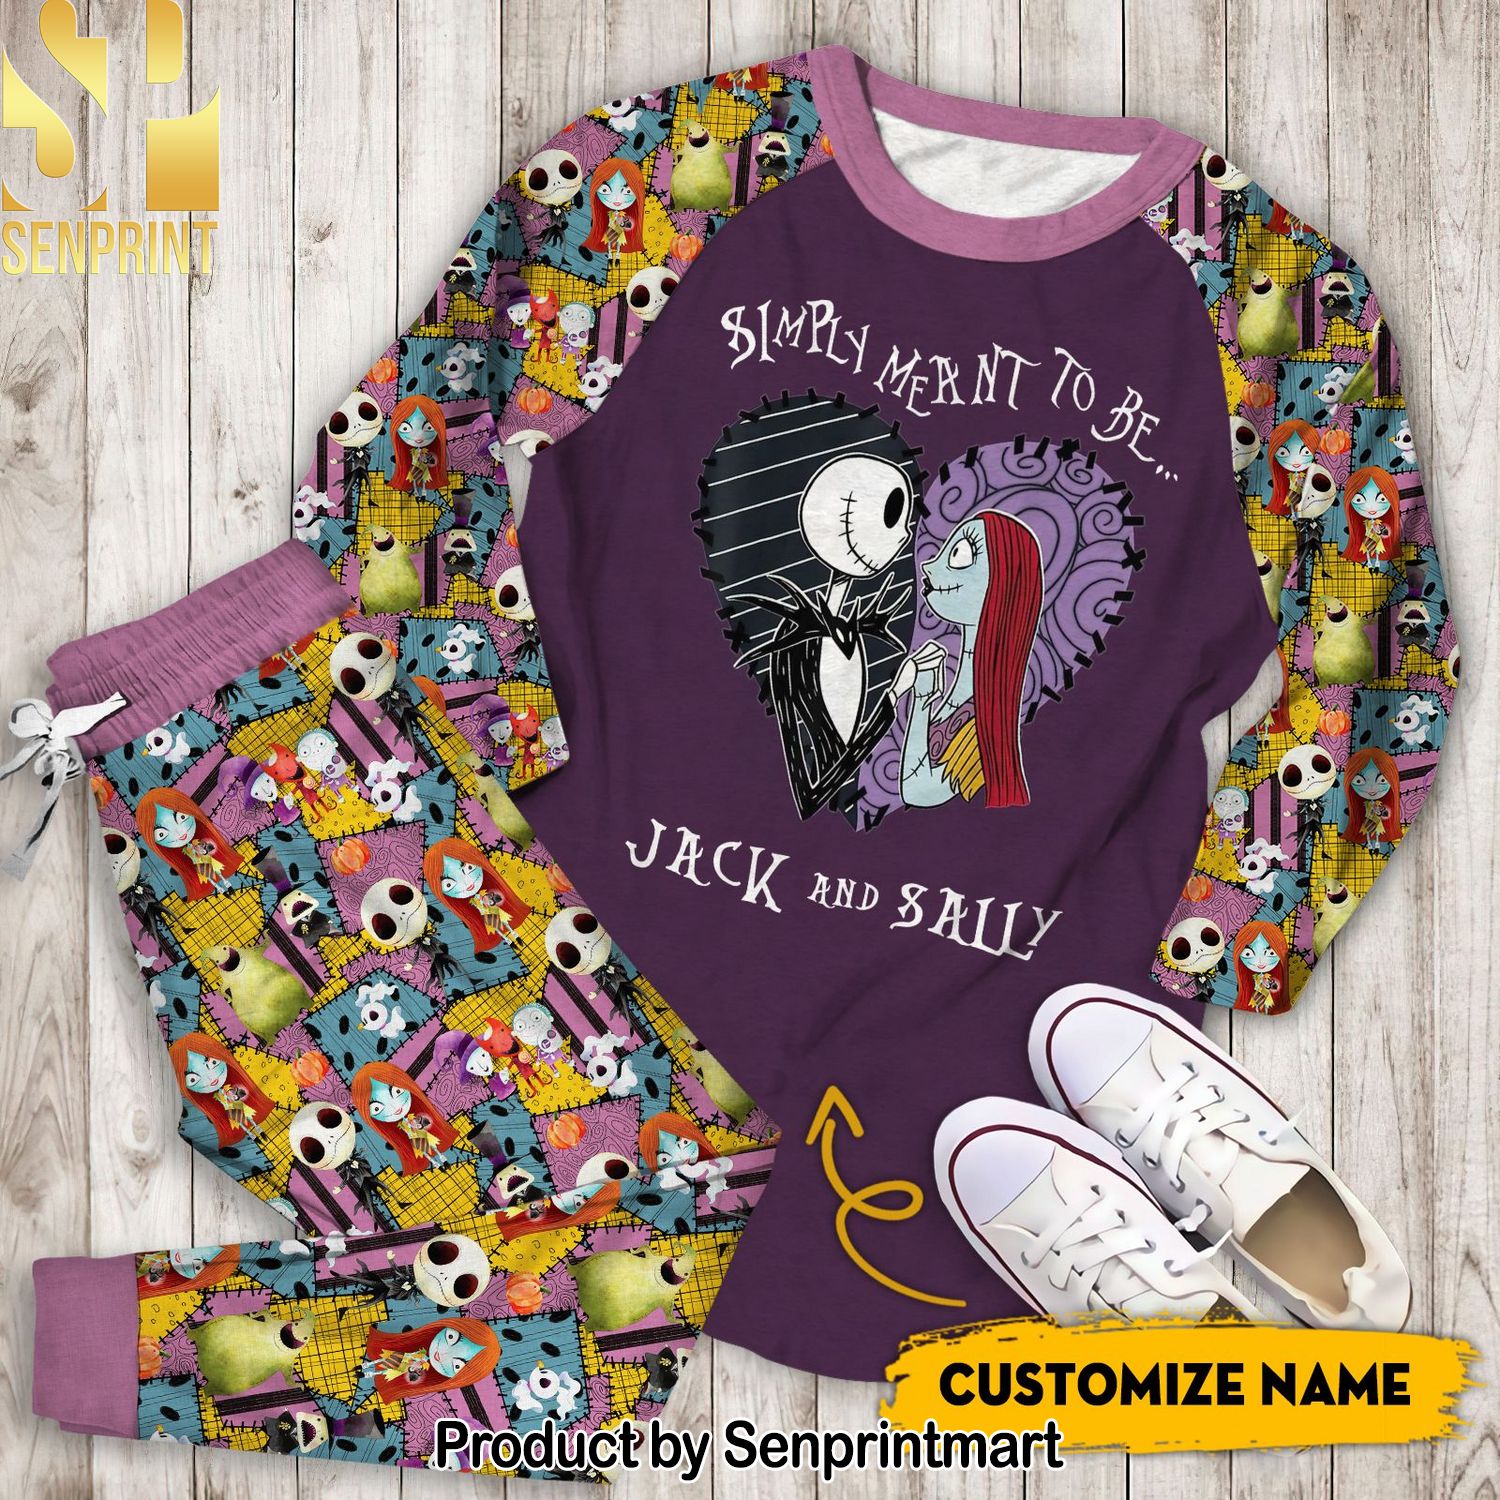 Simply Mean To Be Jack And Sally Personalized Name Full Print 3D Pajamas Set